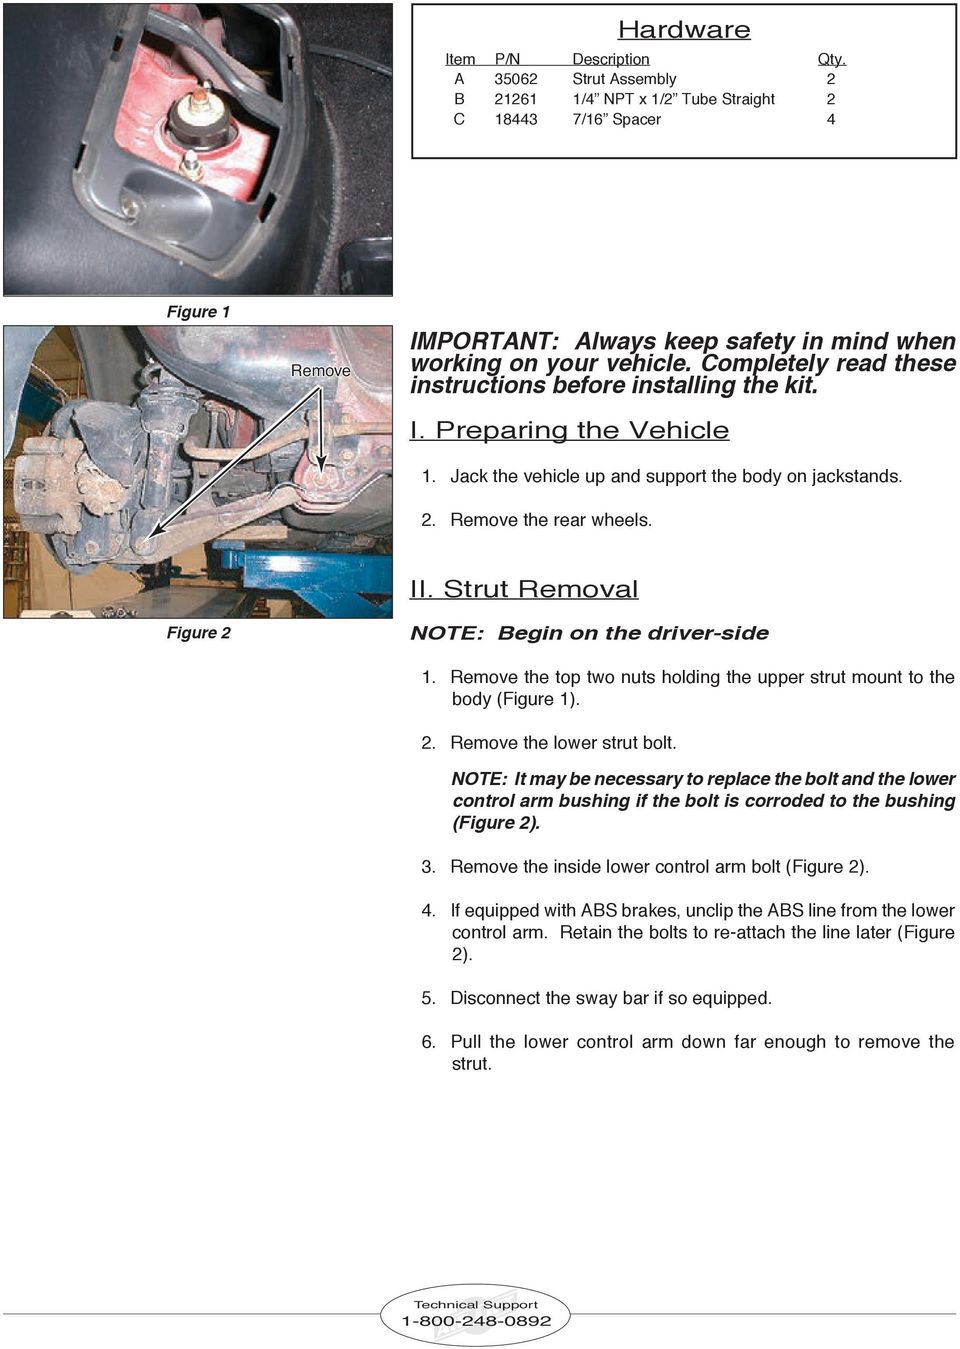 Completely read these instructions before installing the kit. I. Preparing the Vehicle 1. Jack the vehicle up and support the body on jackstands. 2. Remove the rear wheels. Figure 2 II.